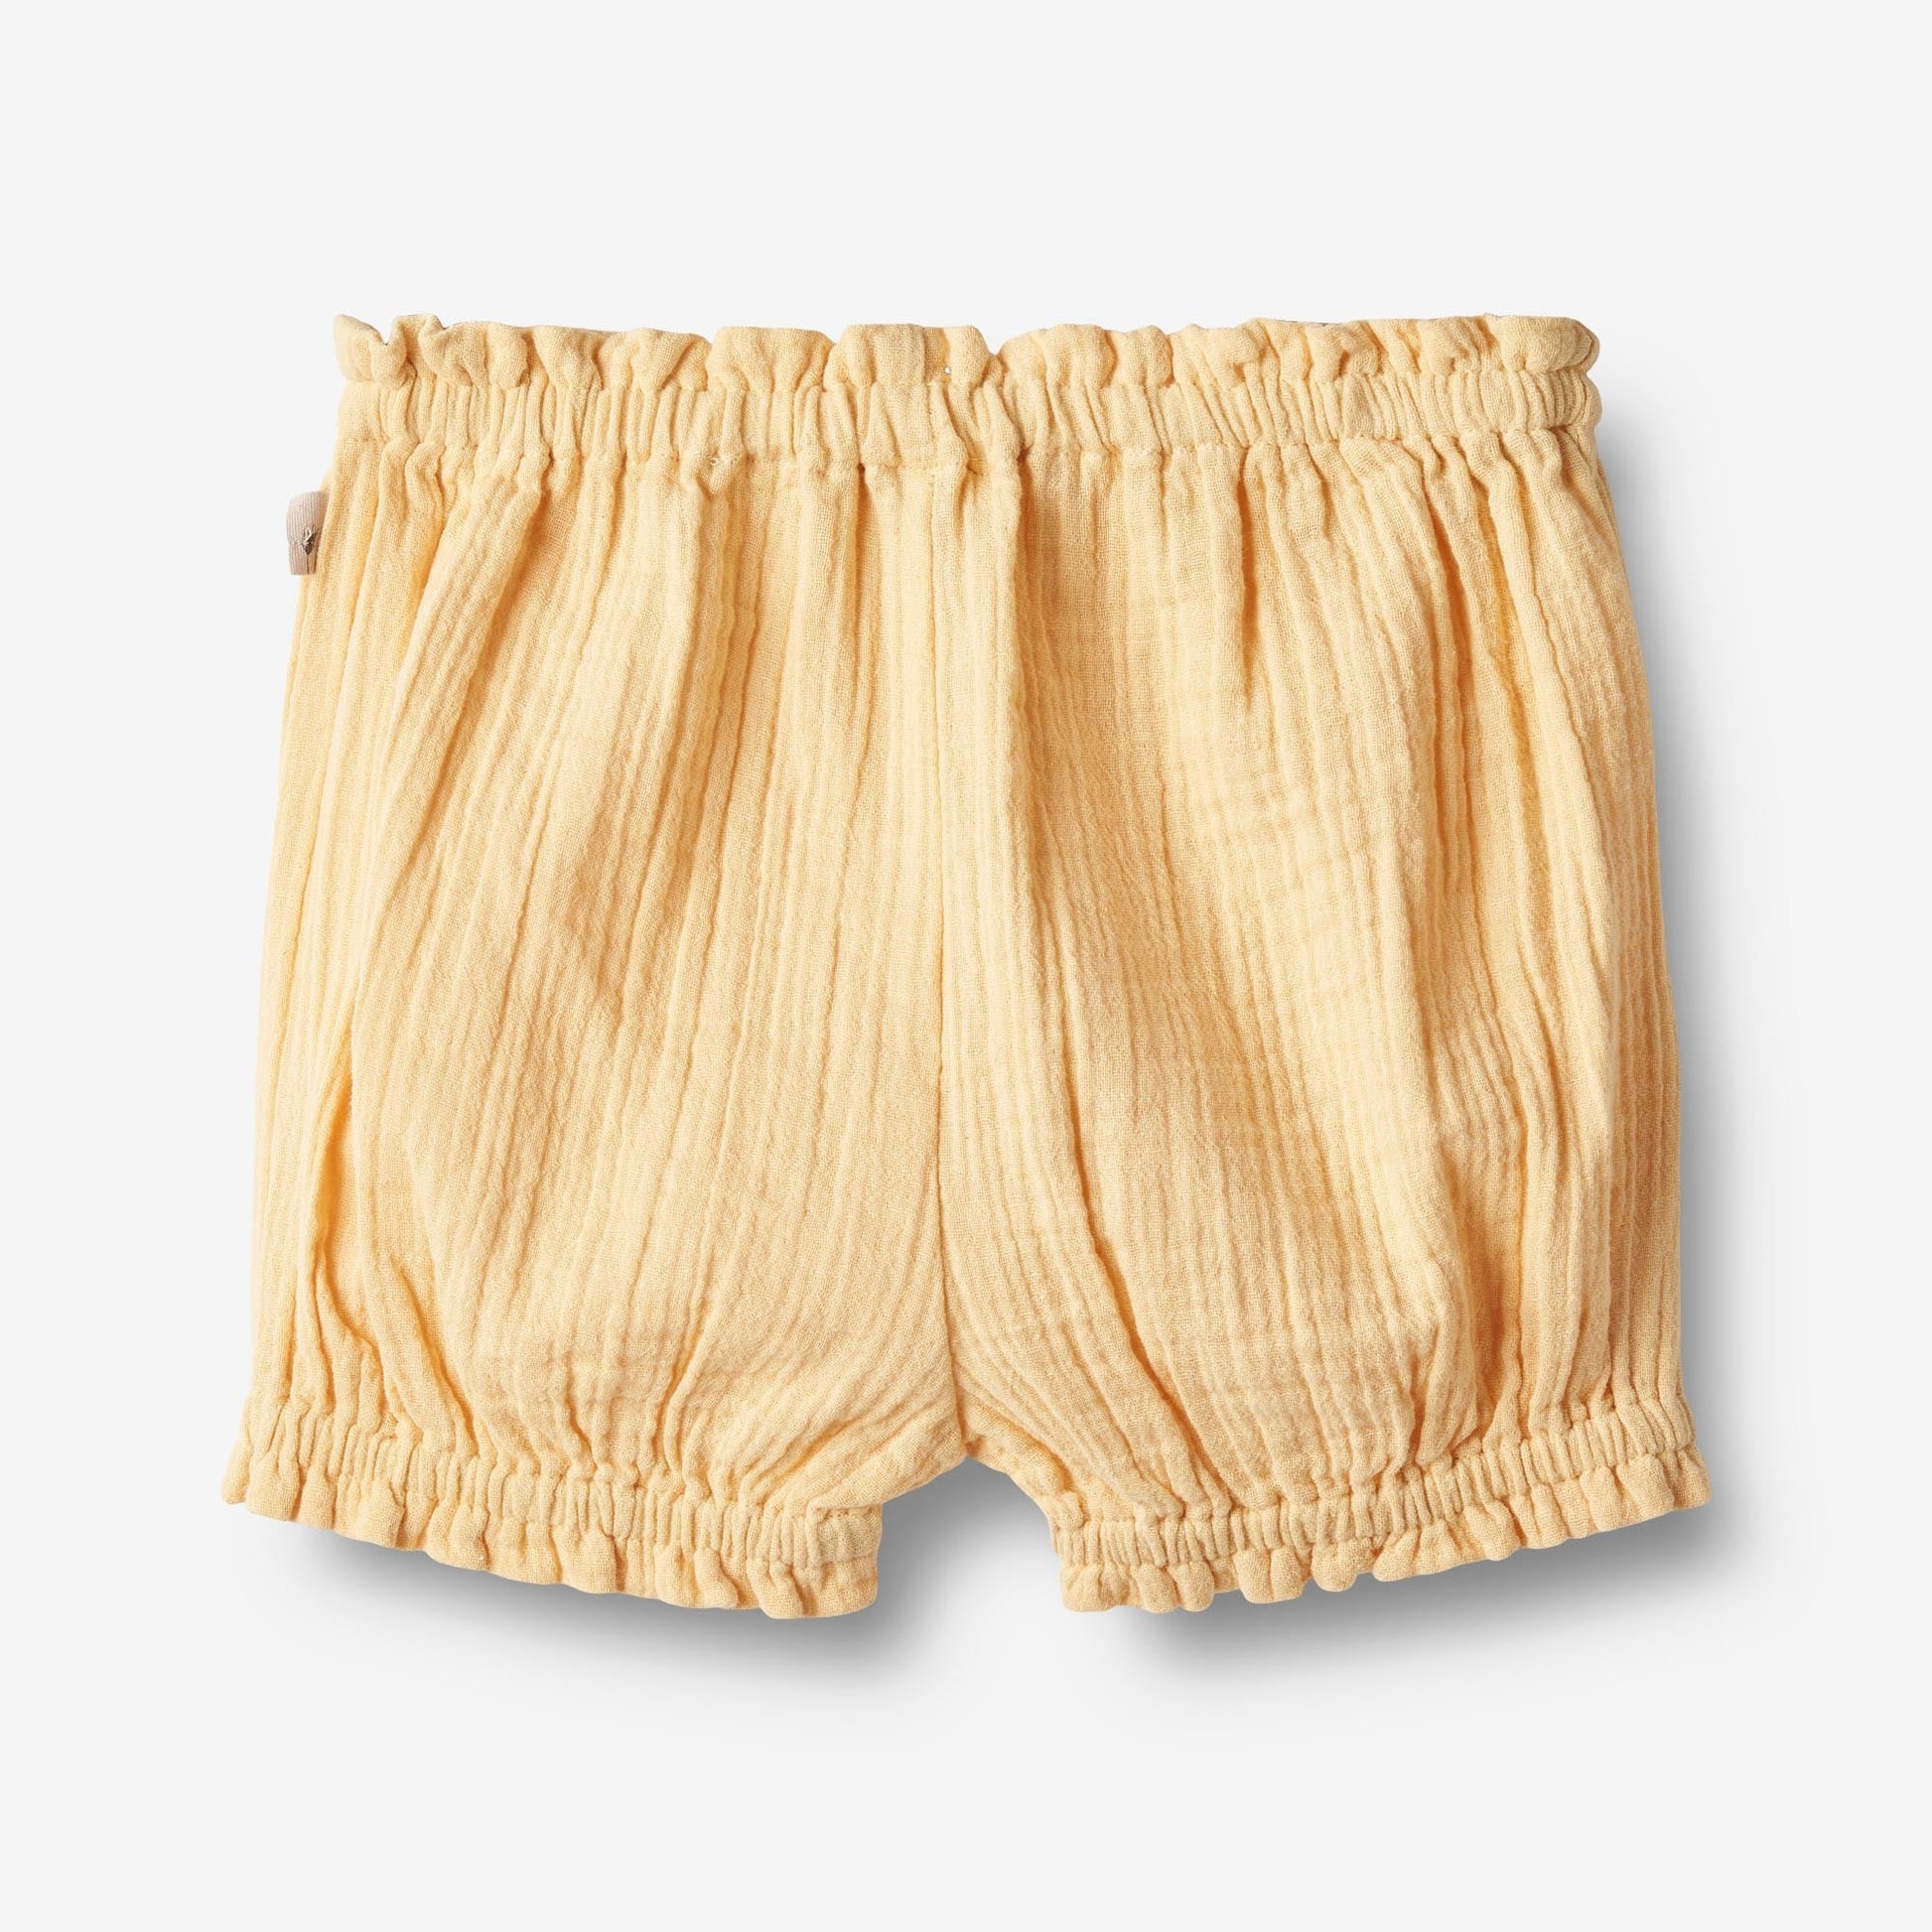 Wheat 'Angie' Baby Nappy Pants - Pale Apricot